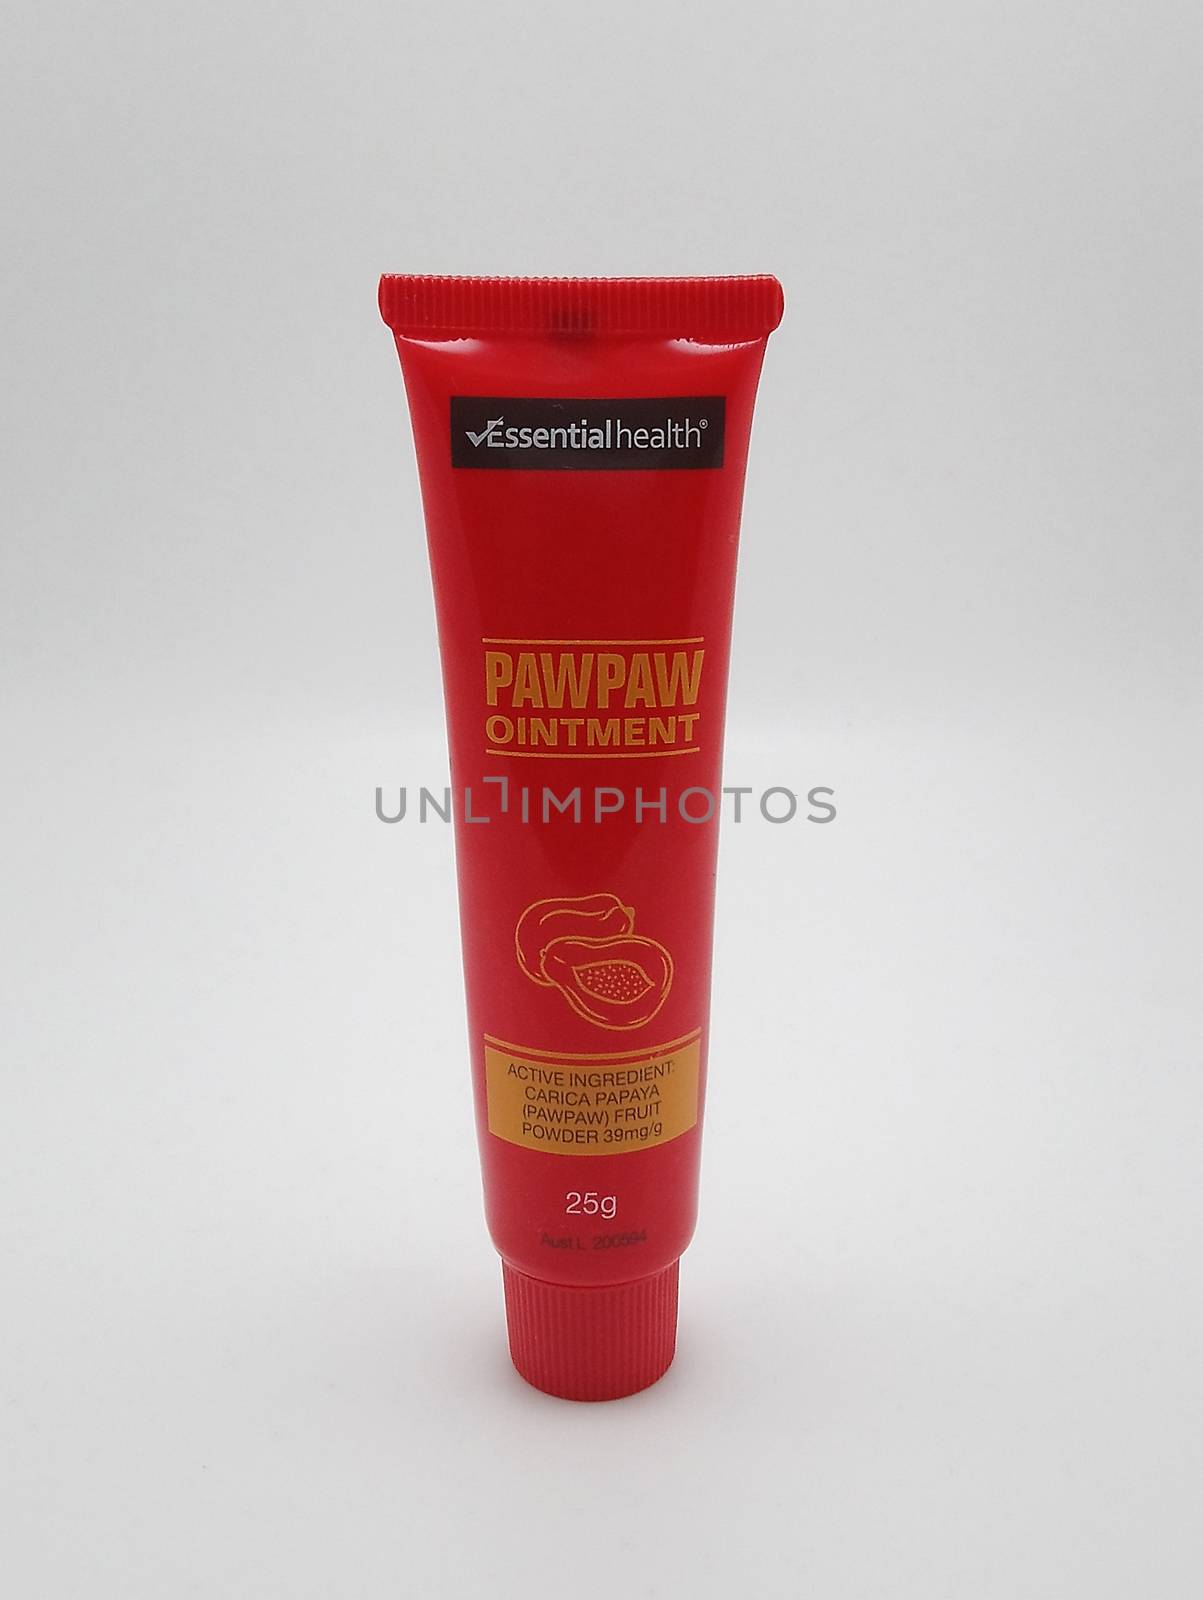 Essential health paw paw ointment in Manila, Philippines by imwaltersy